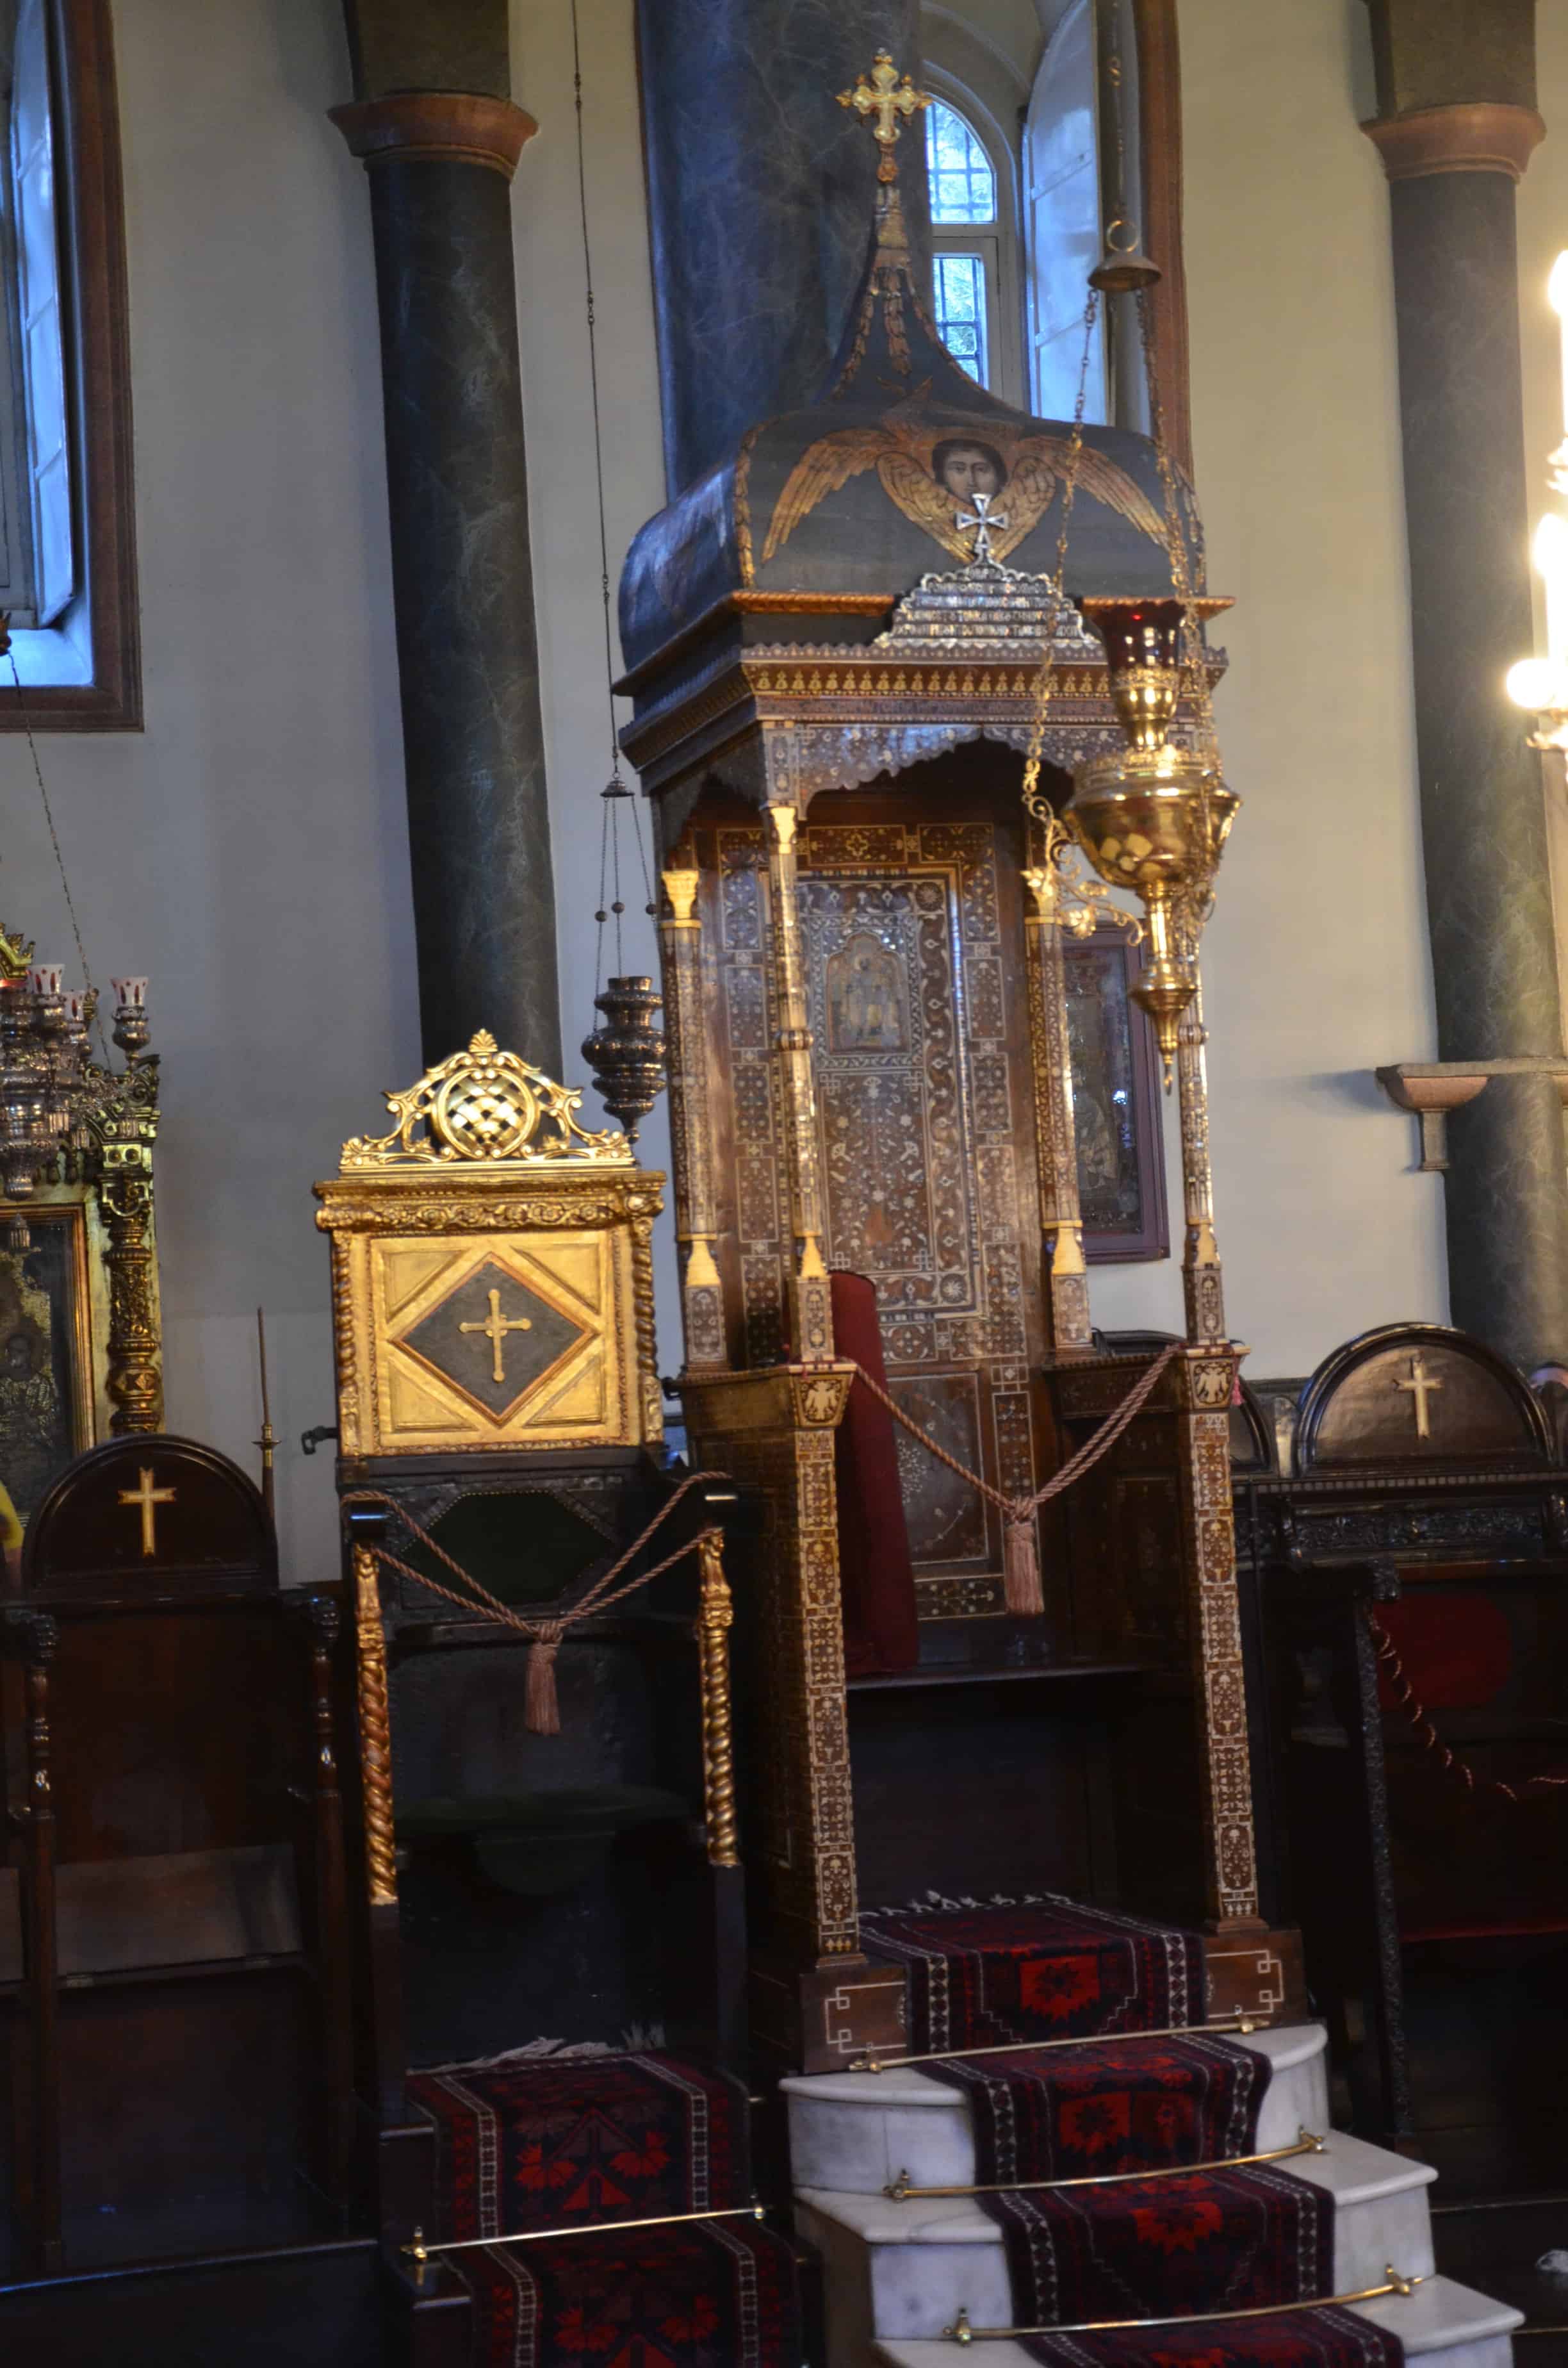 Patriarchal throne at the Church of St. George at the Ecumenical Patriarchate of Constantinople in Fener, Istanbul, Turkey